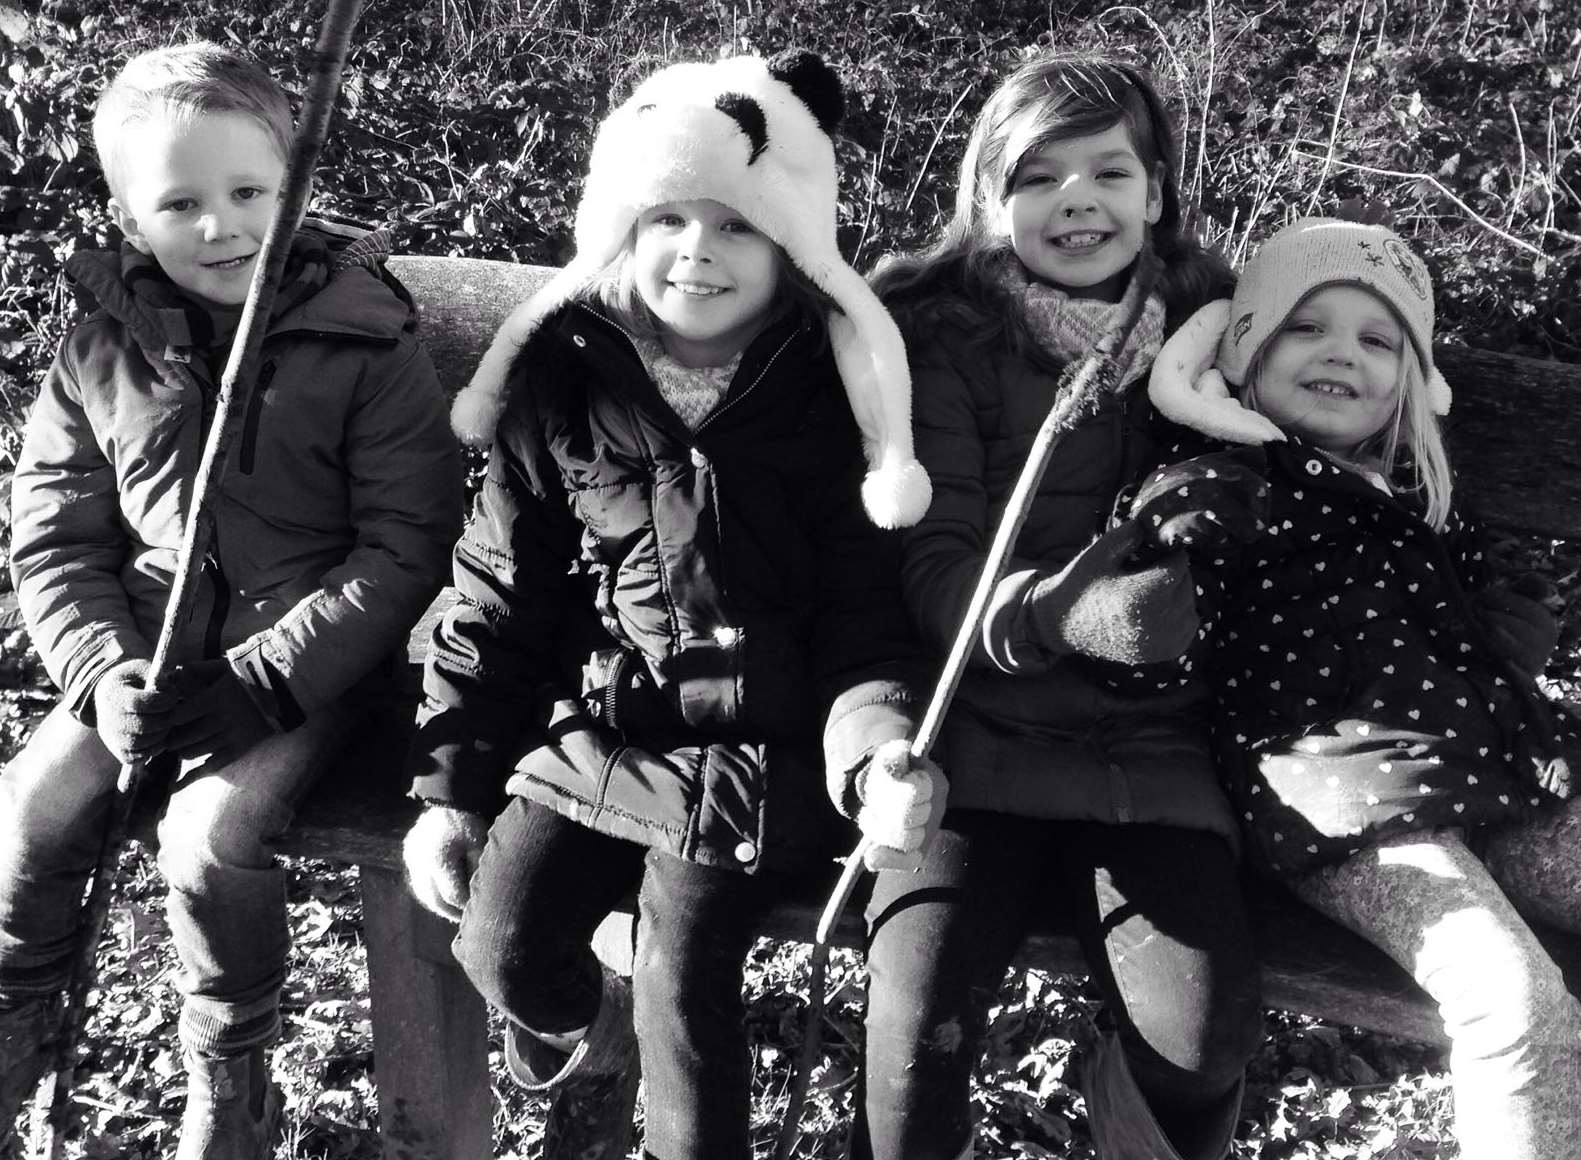 Wrapped up warm and ready to take on February's school break whatever the weather!